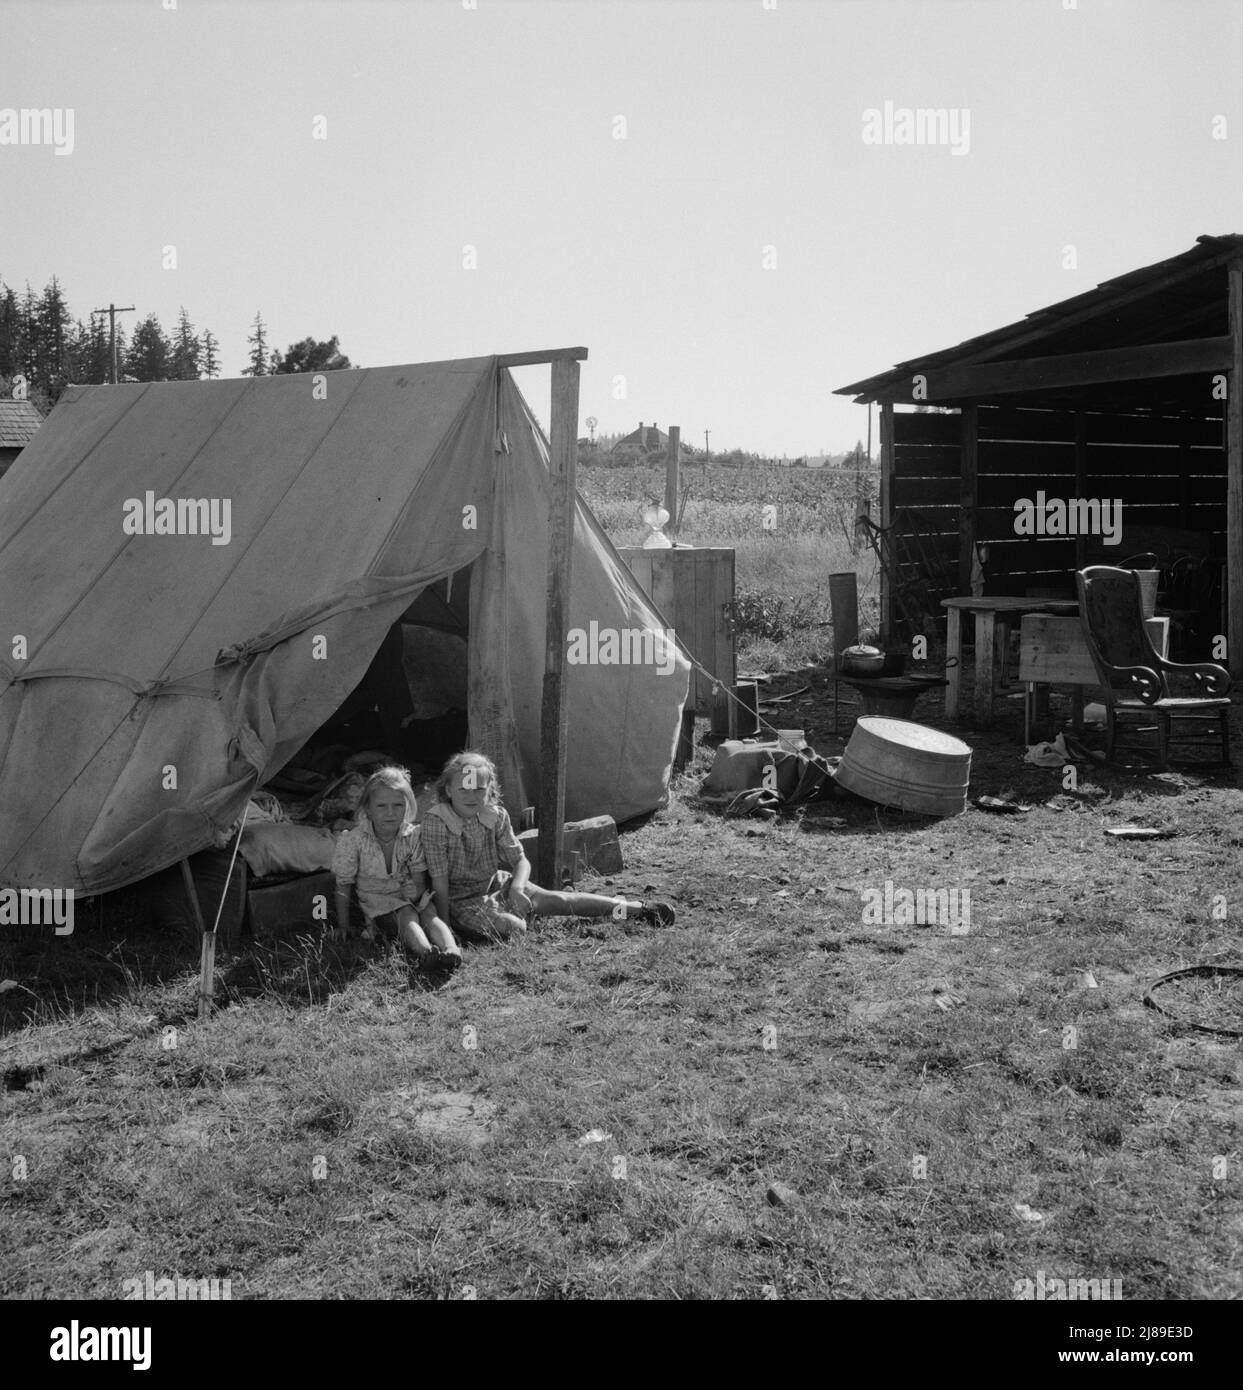 [Untitled, possibly related to: Bean pickers' camp in grower's yard. No running water. Marion County, near West Stayton, Oregon. Stock Photo